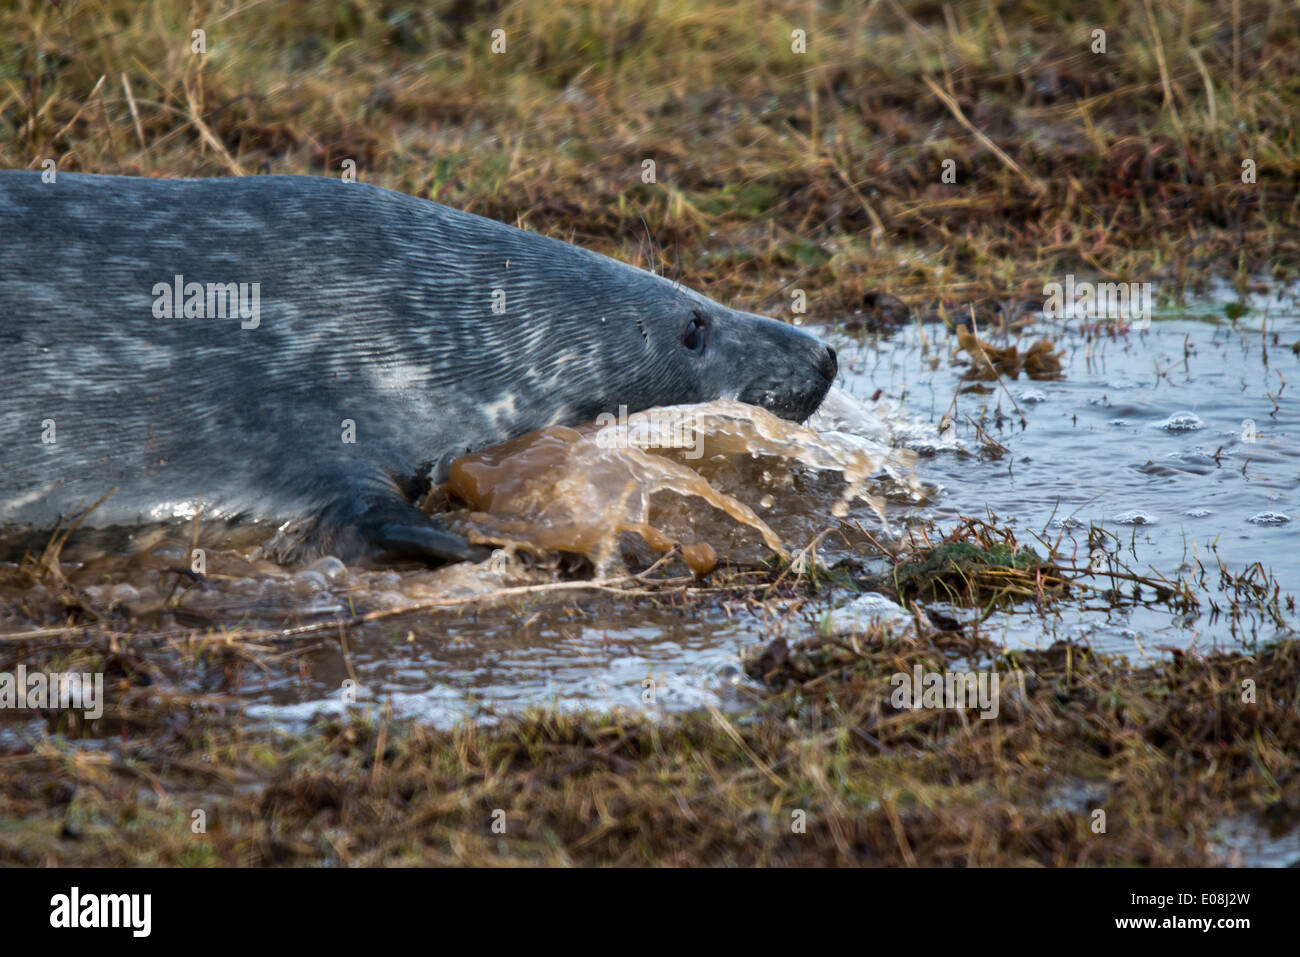 Grey Seal - Halichoerus grypus (Meaning Hooked-nosed sea pig). This image was taken at Donna Nook, Lincolnshire, UK Stock Photo